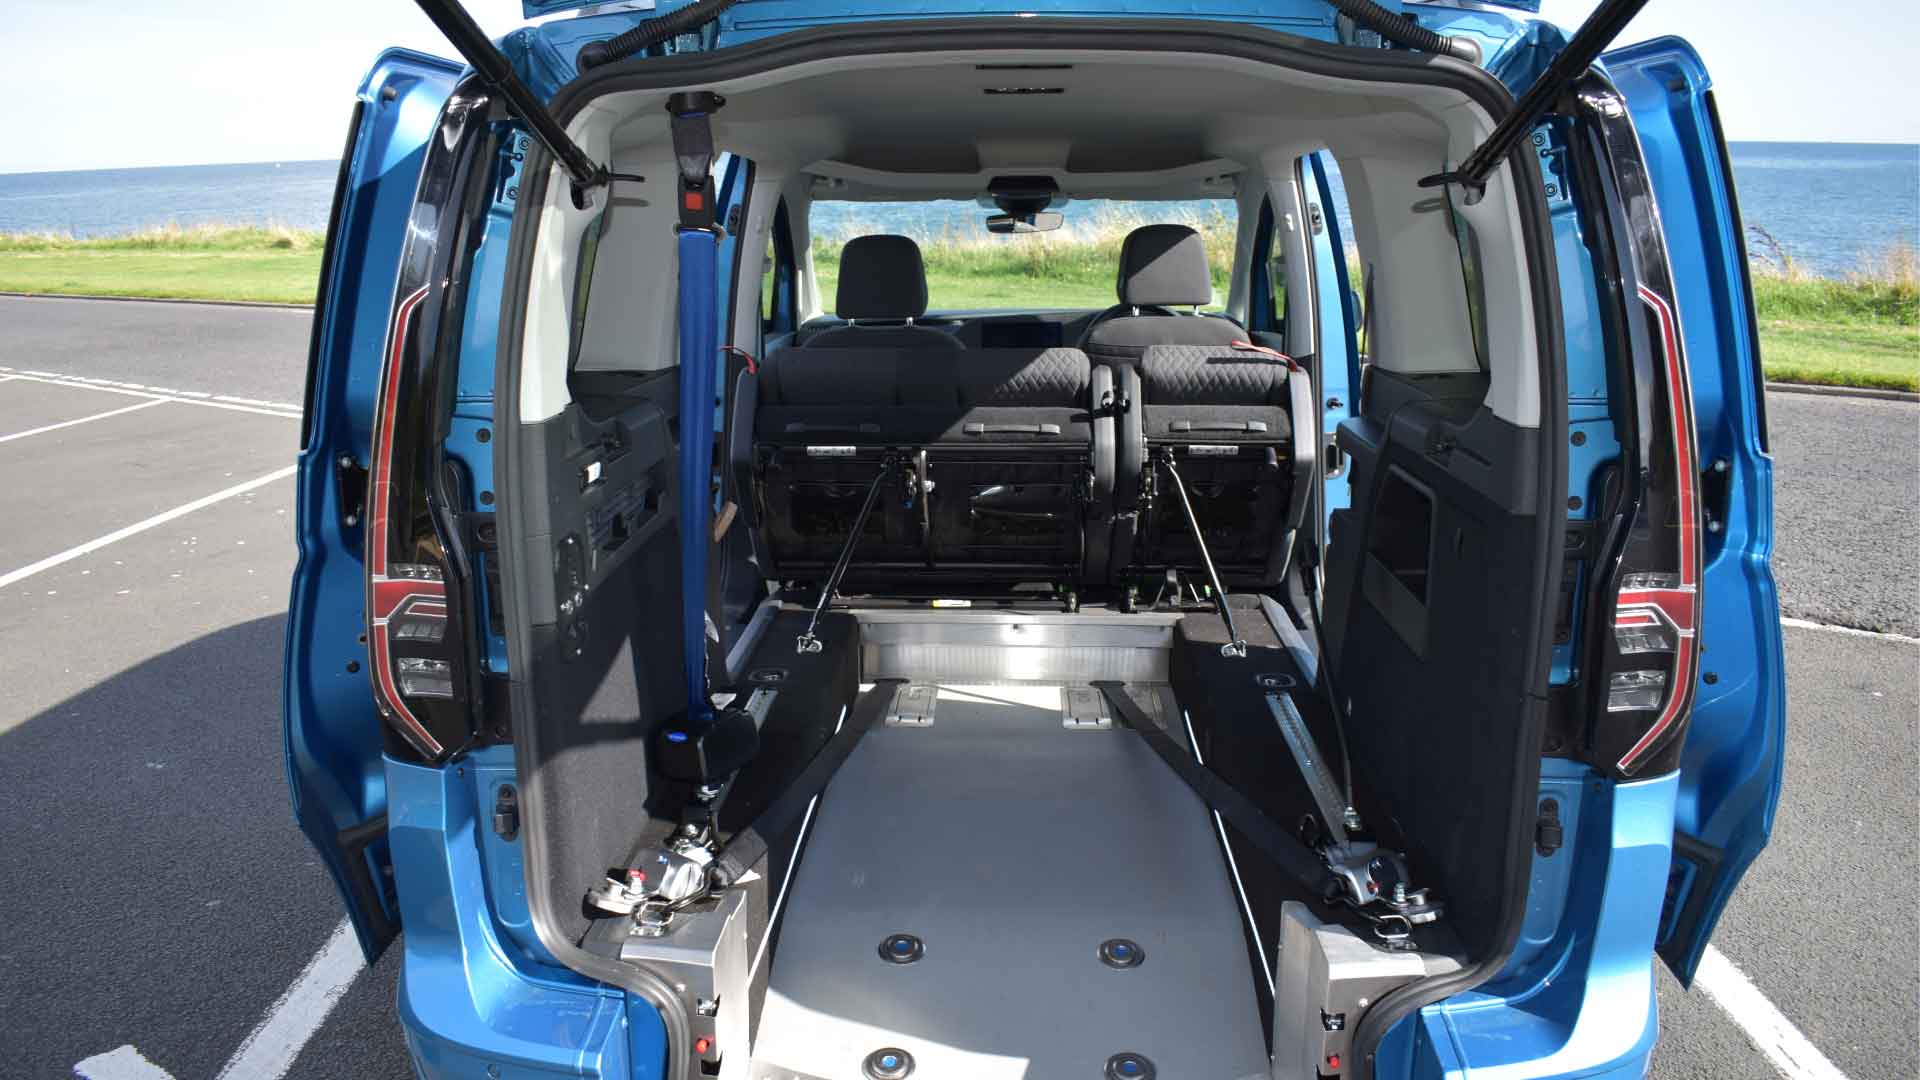 Lewis Reed Group | British Supplier of Wheelchair Accessible Vehicles | Volkswagen Caddy Maxi 5 interior from rear